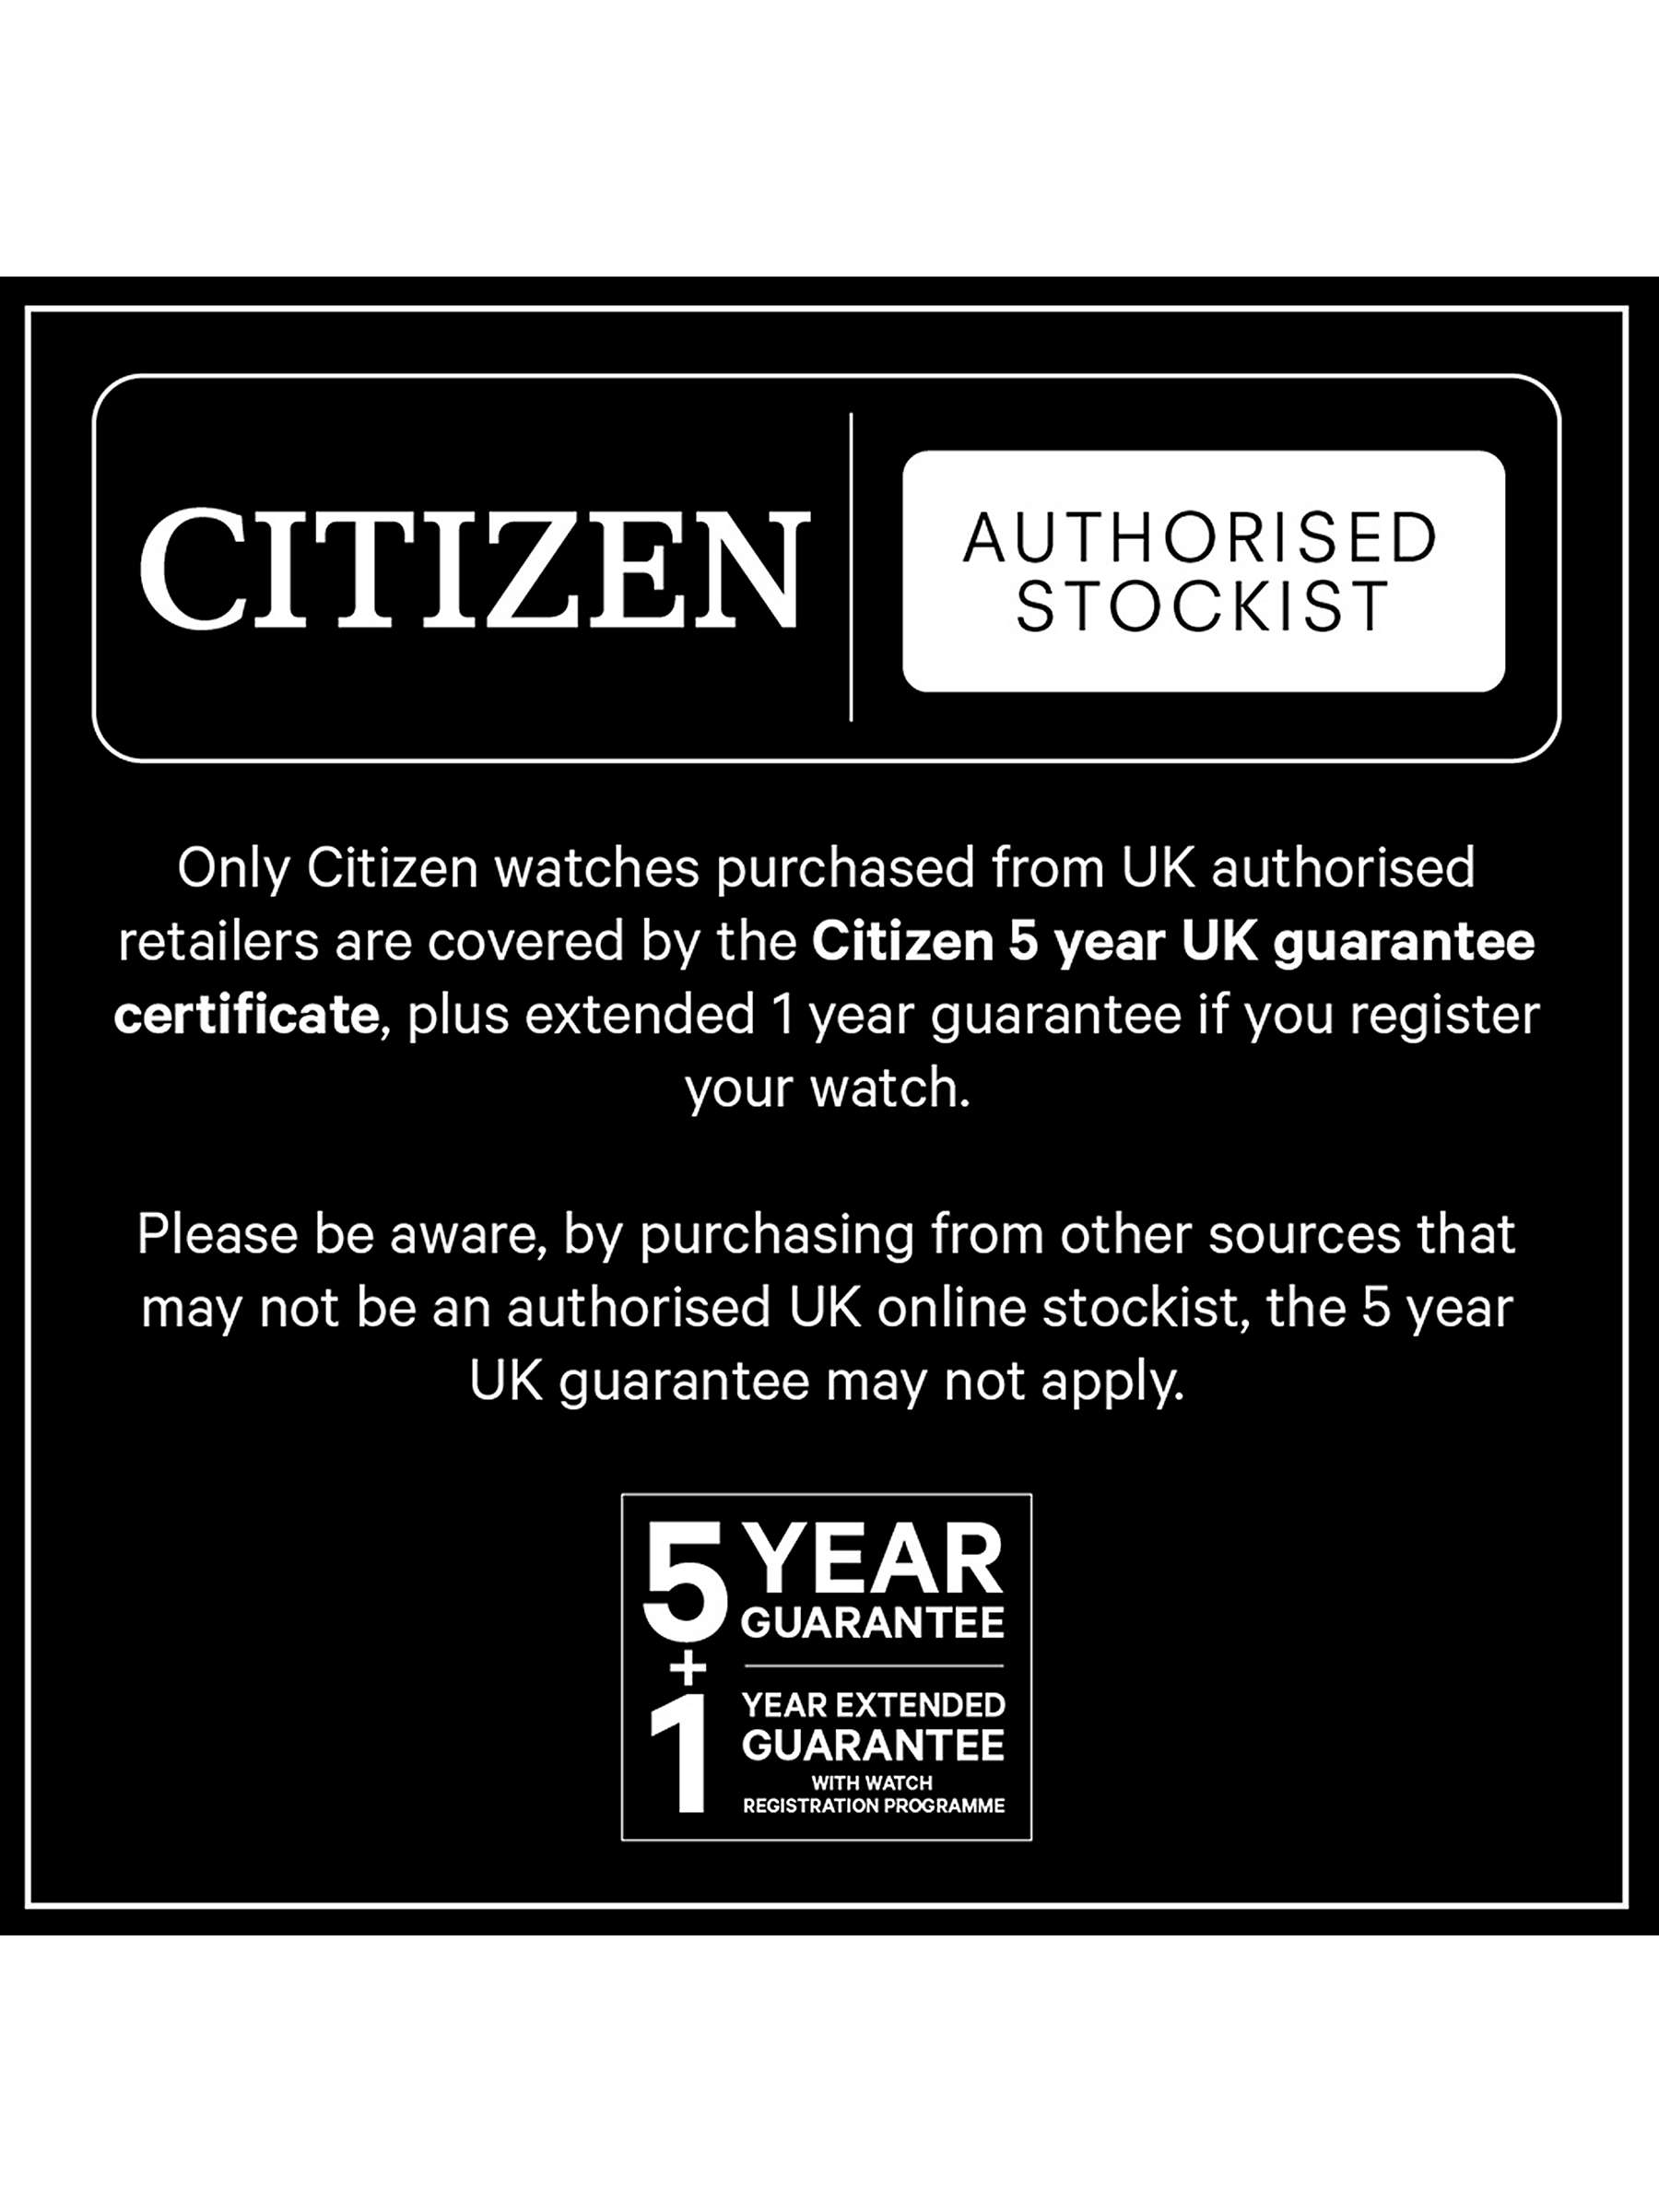 Buy Citizen EW1534-57D Women's Eco-Drive Mother of Pearl Two Tone Bracelet Strap Watch, Silver/Gold Online at johnlewis.com